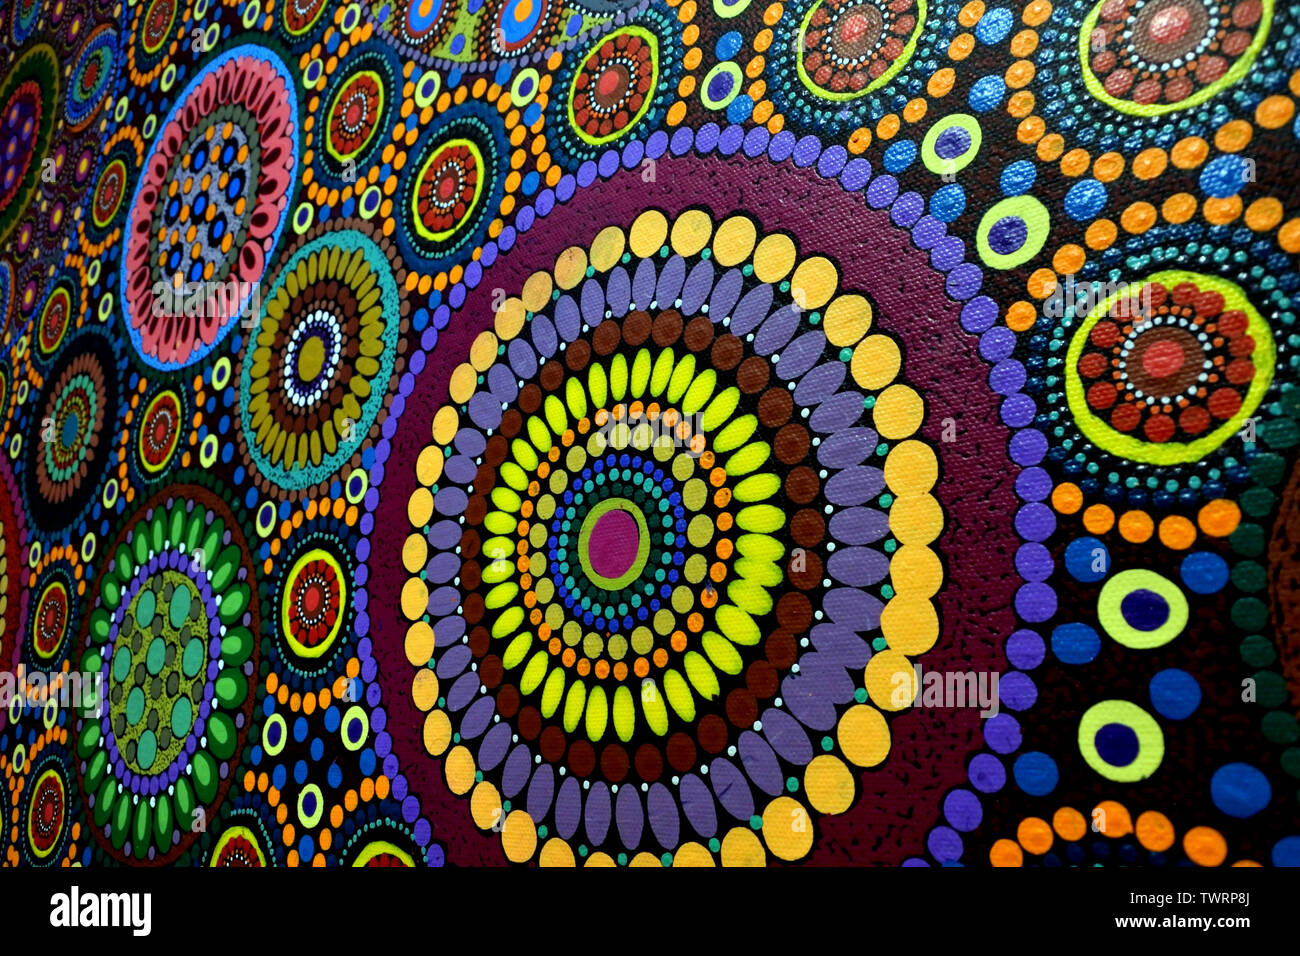 Indigenous Australian Art Dot Painting It S One Of The Oldest Traditional Form Of Art In The World Stock Photo Alamy